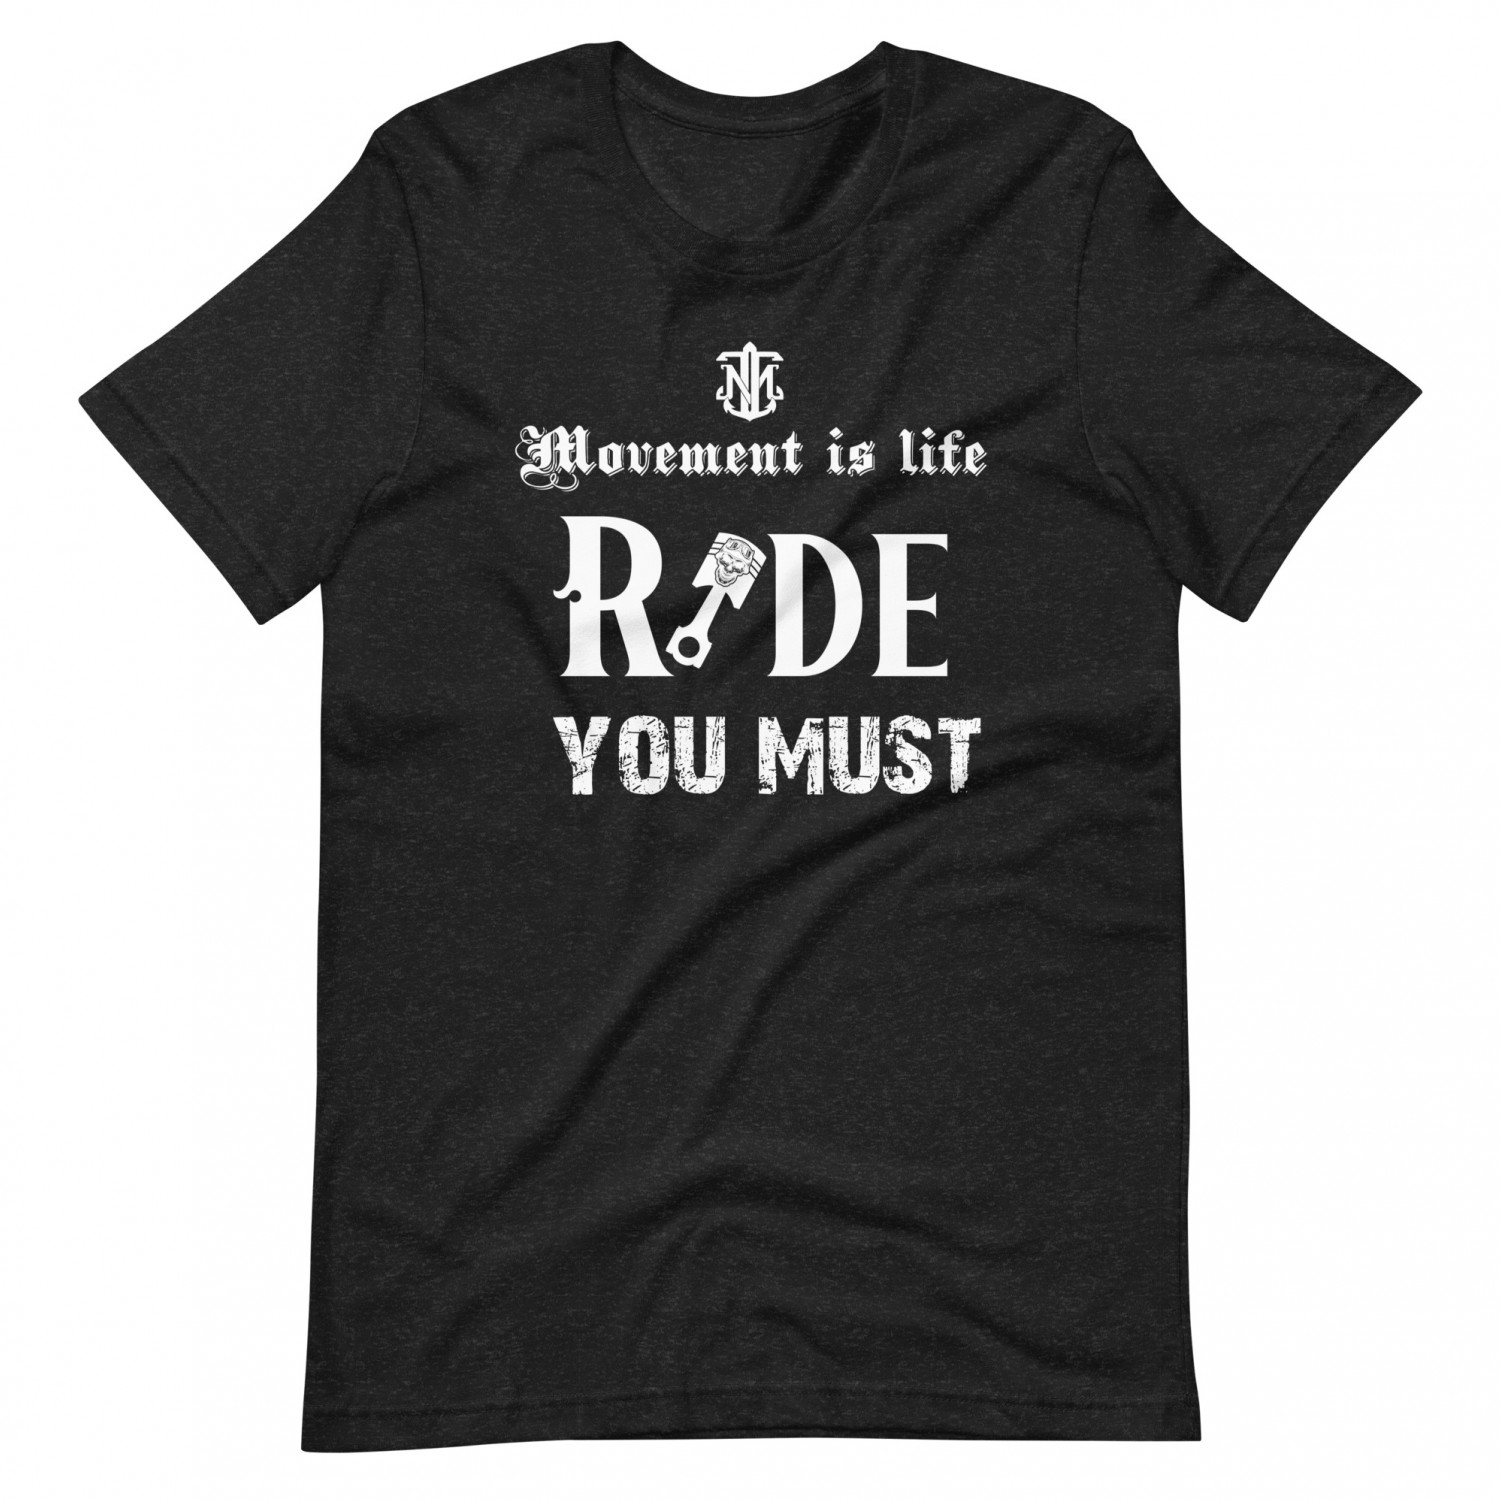 Buy Moment is life - Ride You Must t-shirt